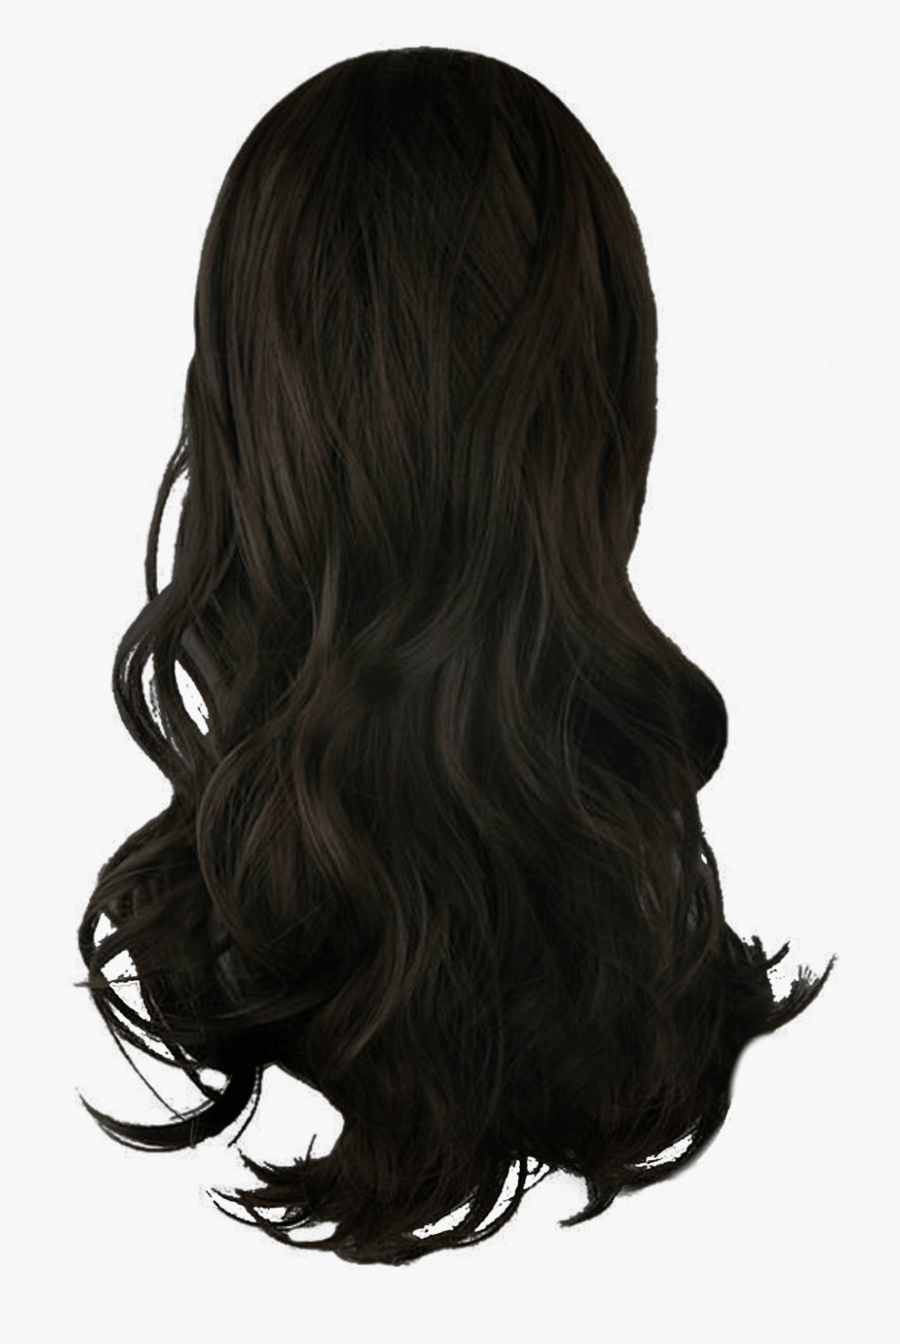 Hair Back Png - Black Wavy Hair Png , Free Transparent Clipart - ClipartKey